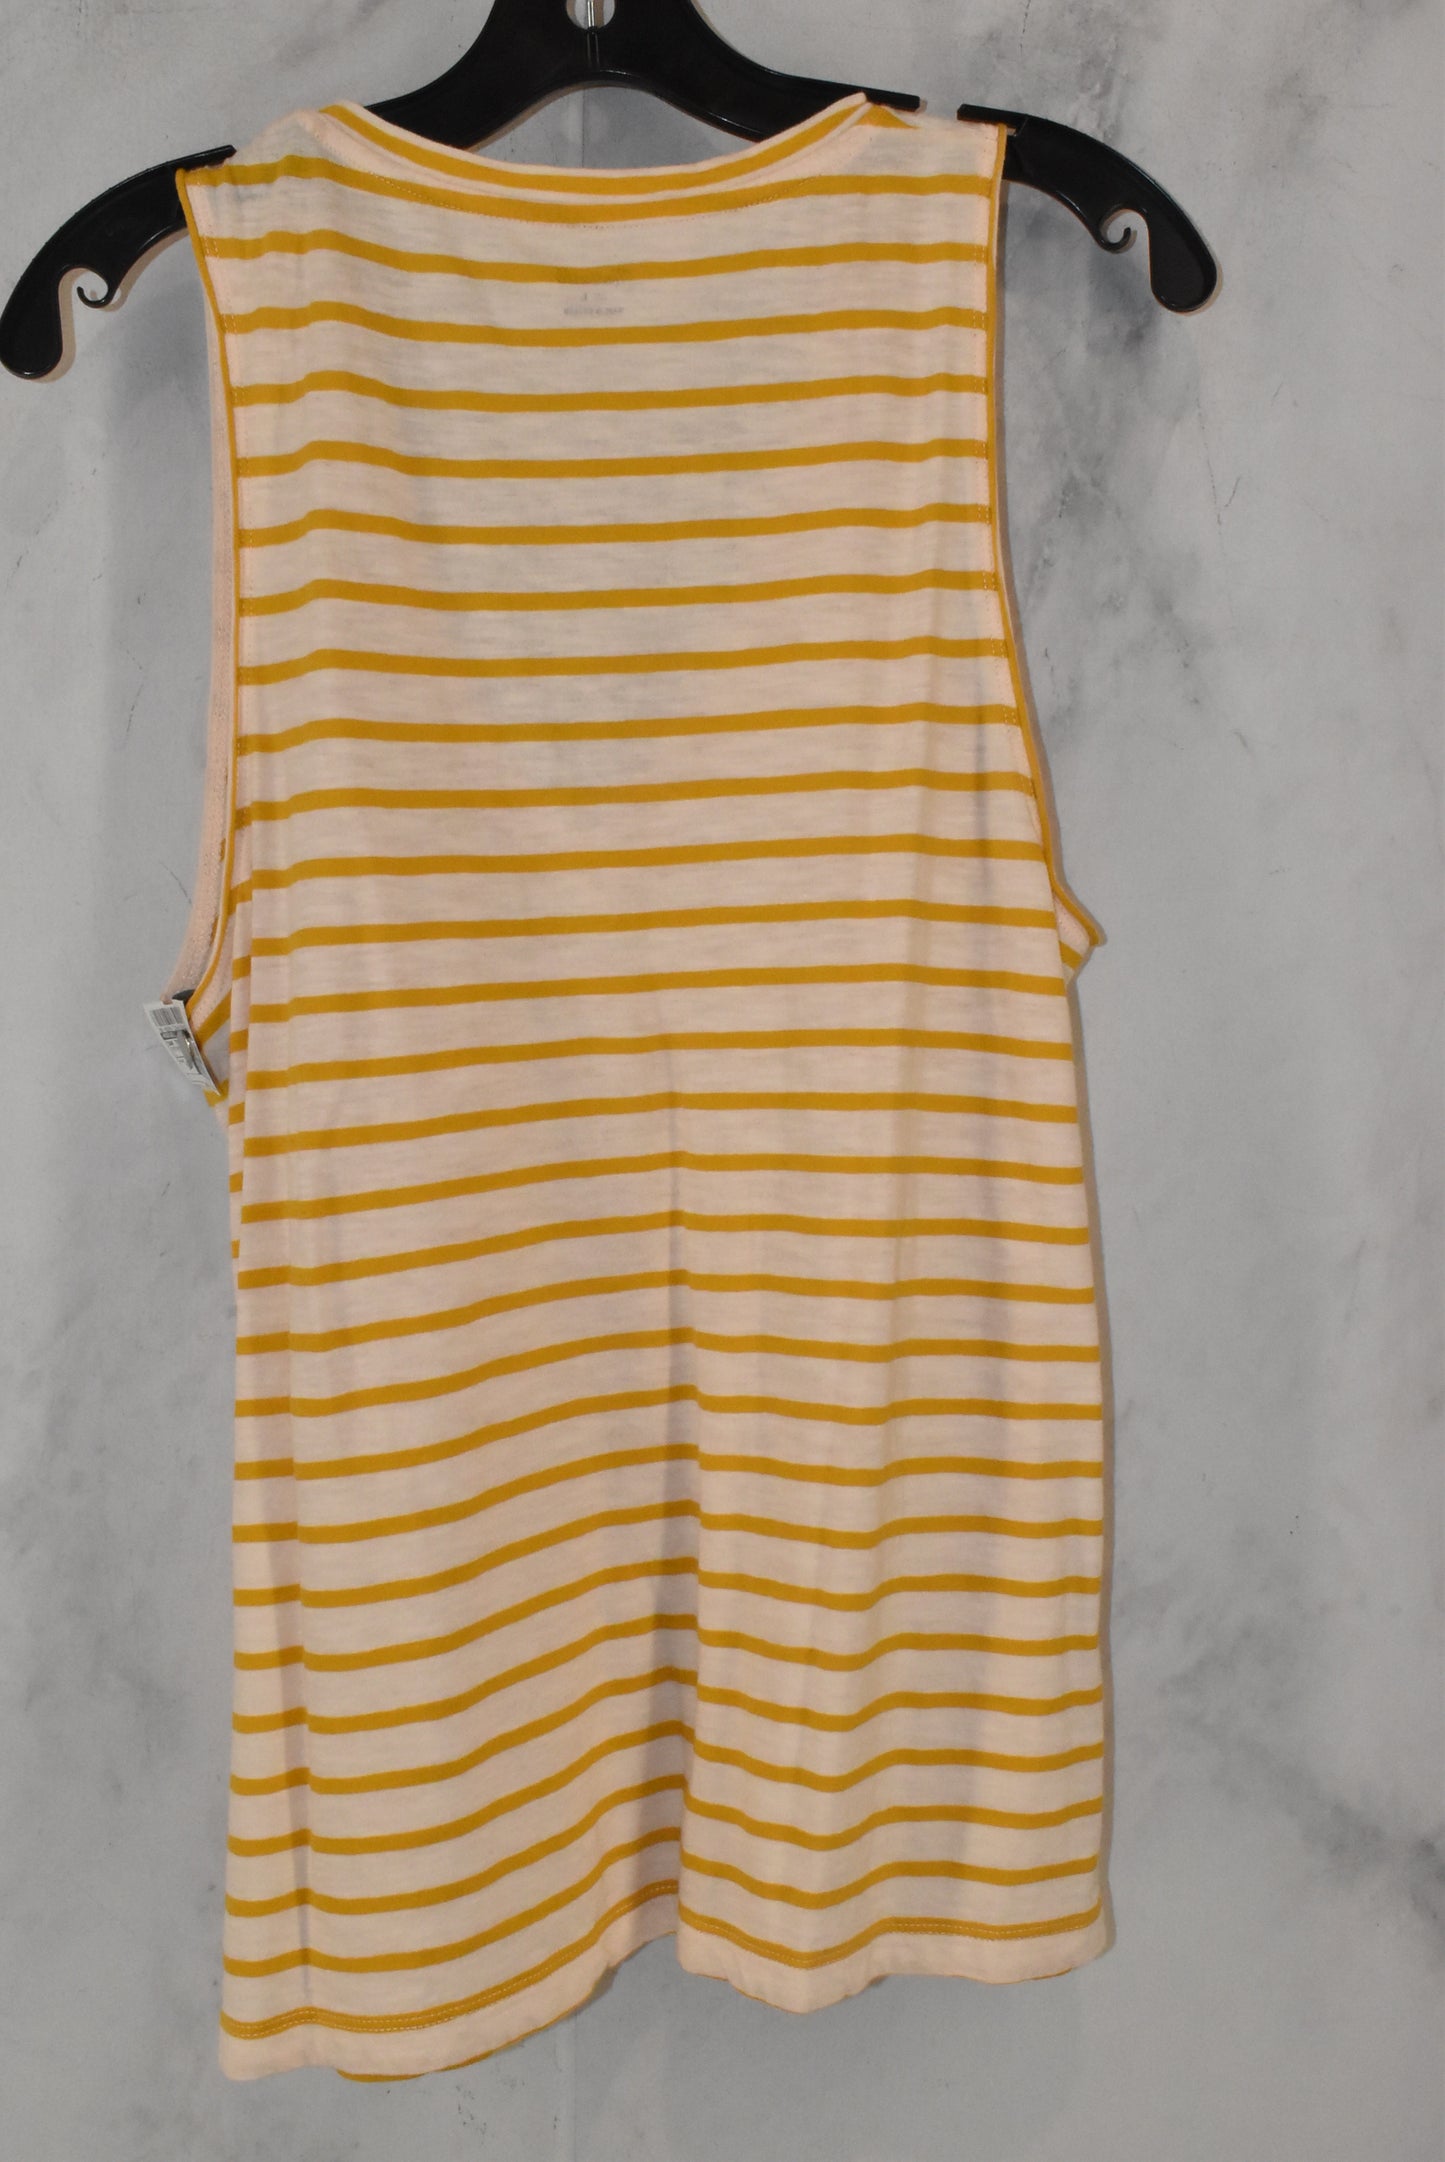 Tank Top By Madewell  Size: L